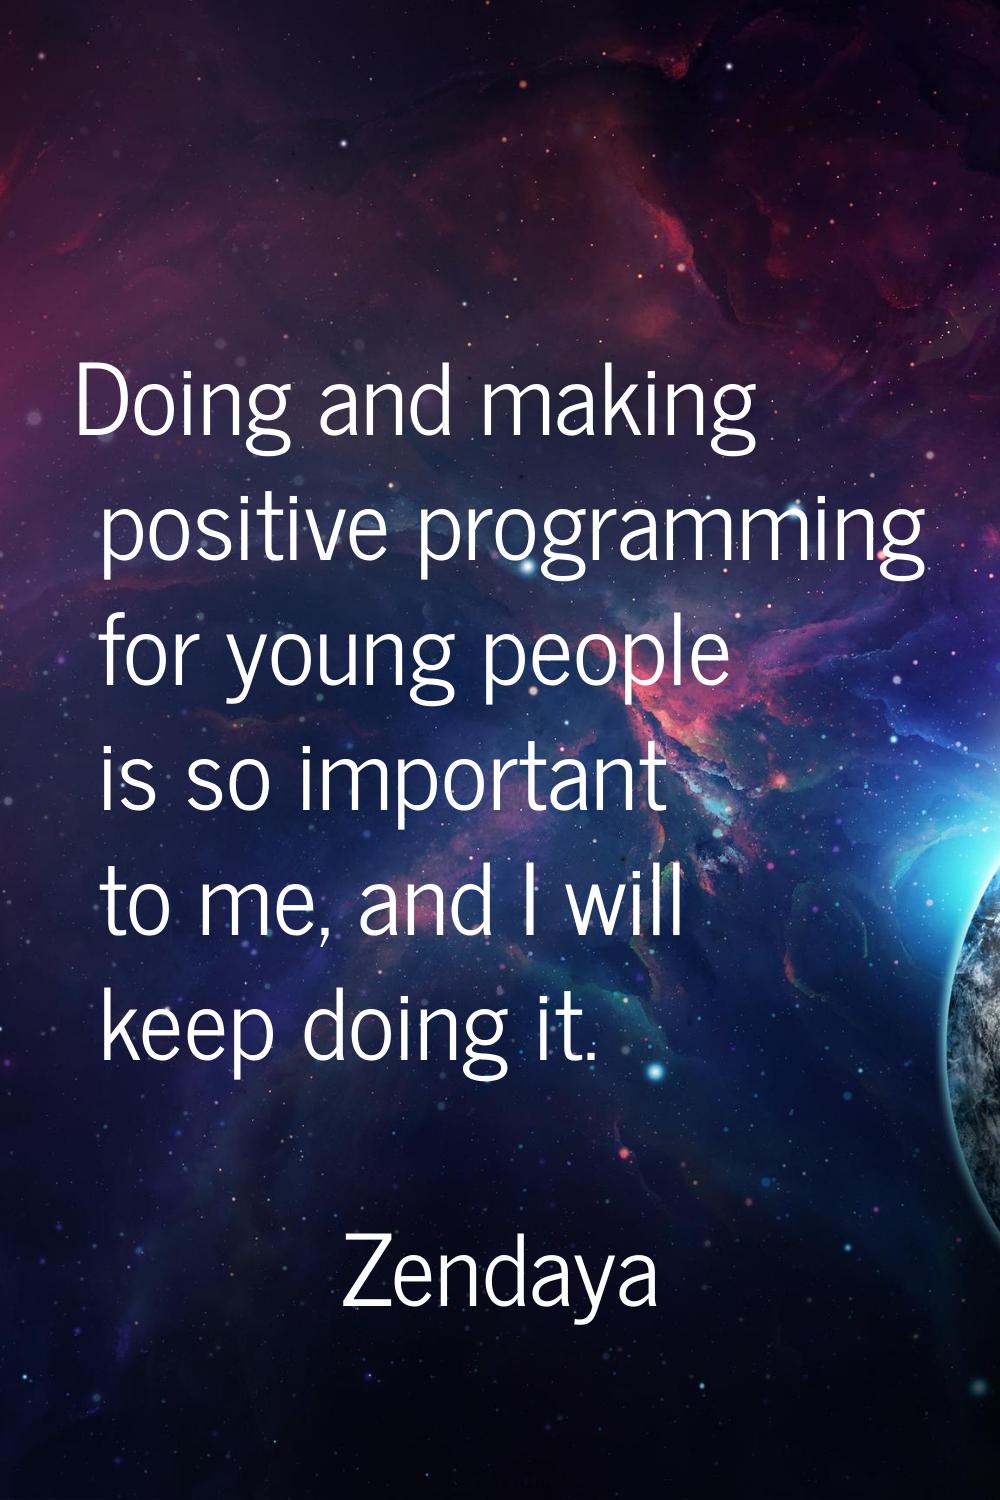 Doing and making positive programming for young people is so important to me, and I will keep doing